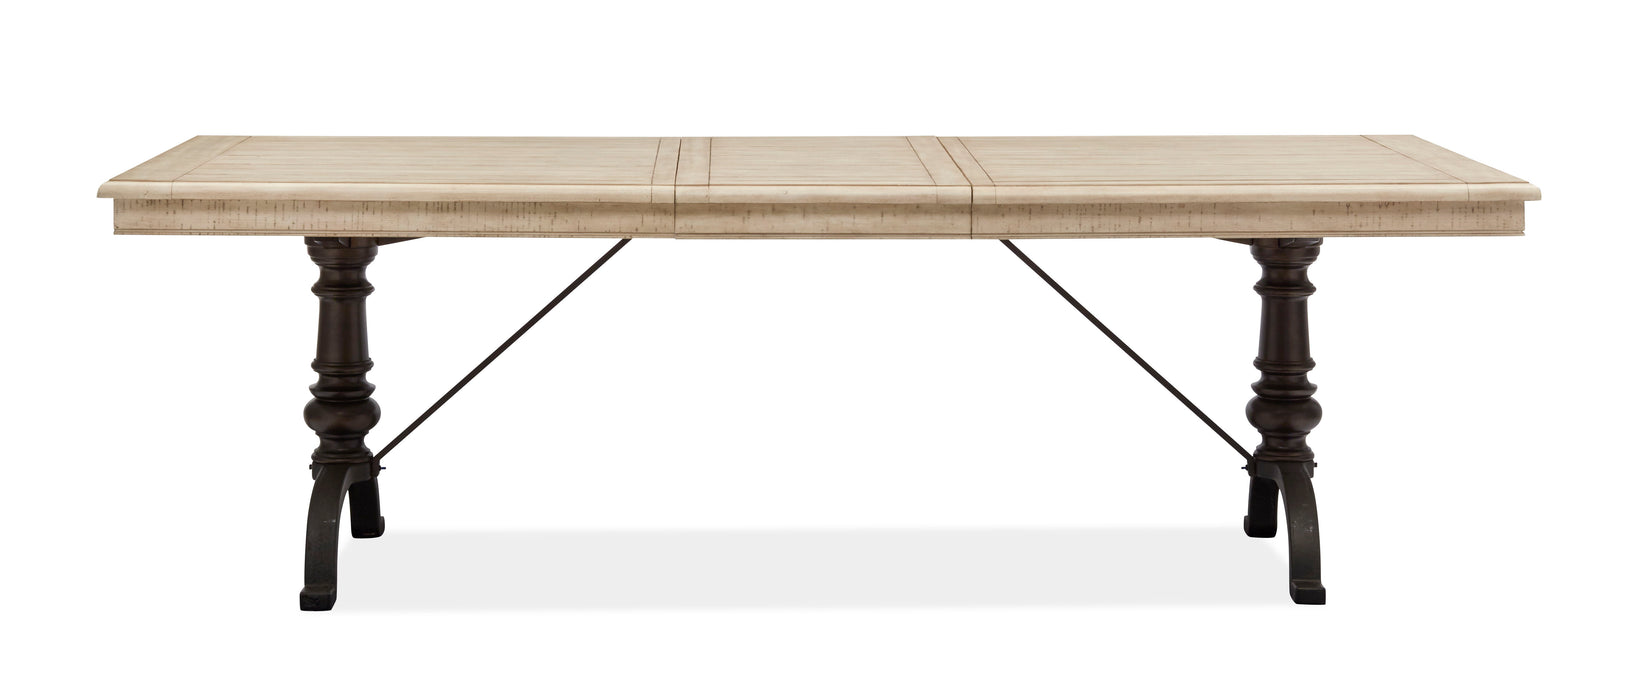 Harlow - Rectangular Dining Table - Weathered Bisque